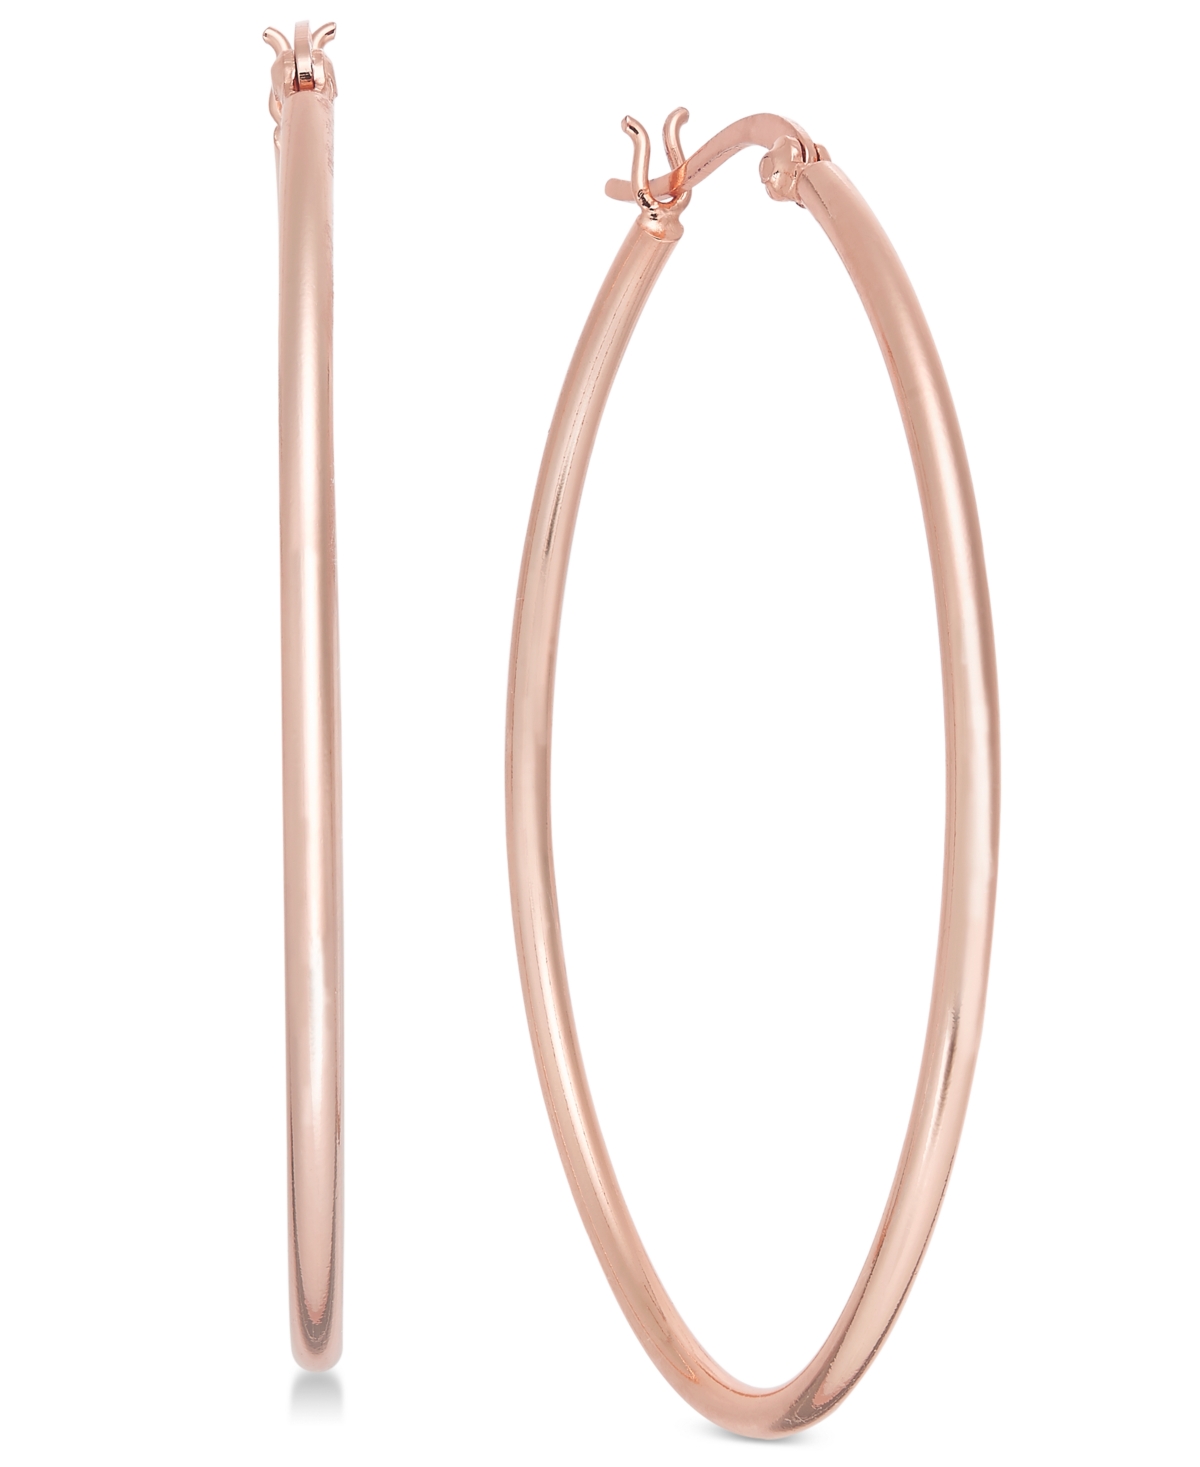 And Now This Large Rose Gold Plated Polished Oval Medium Hoop Earrings , 2" - Rose Gold